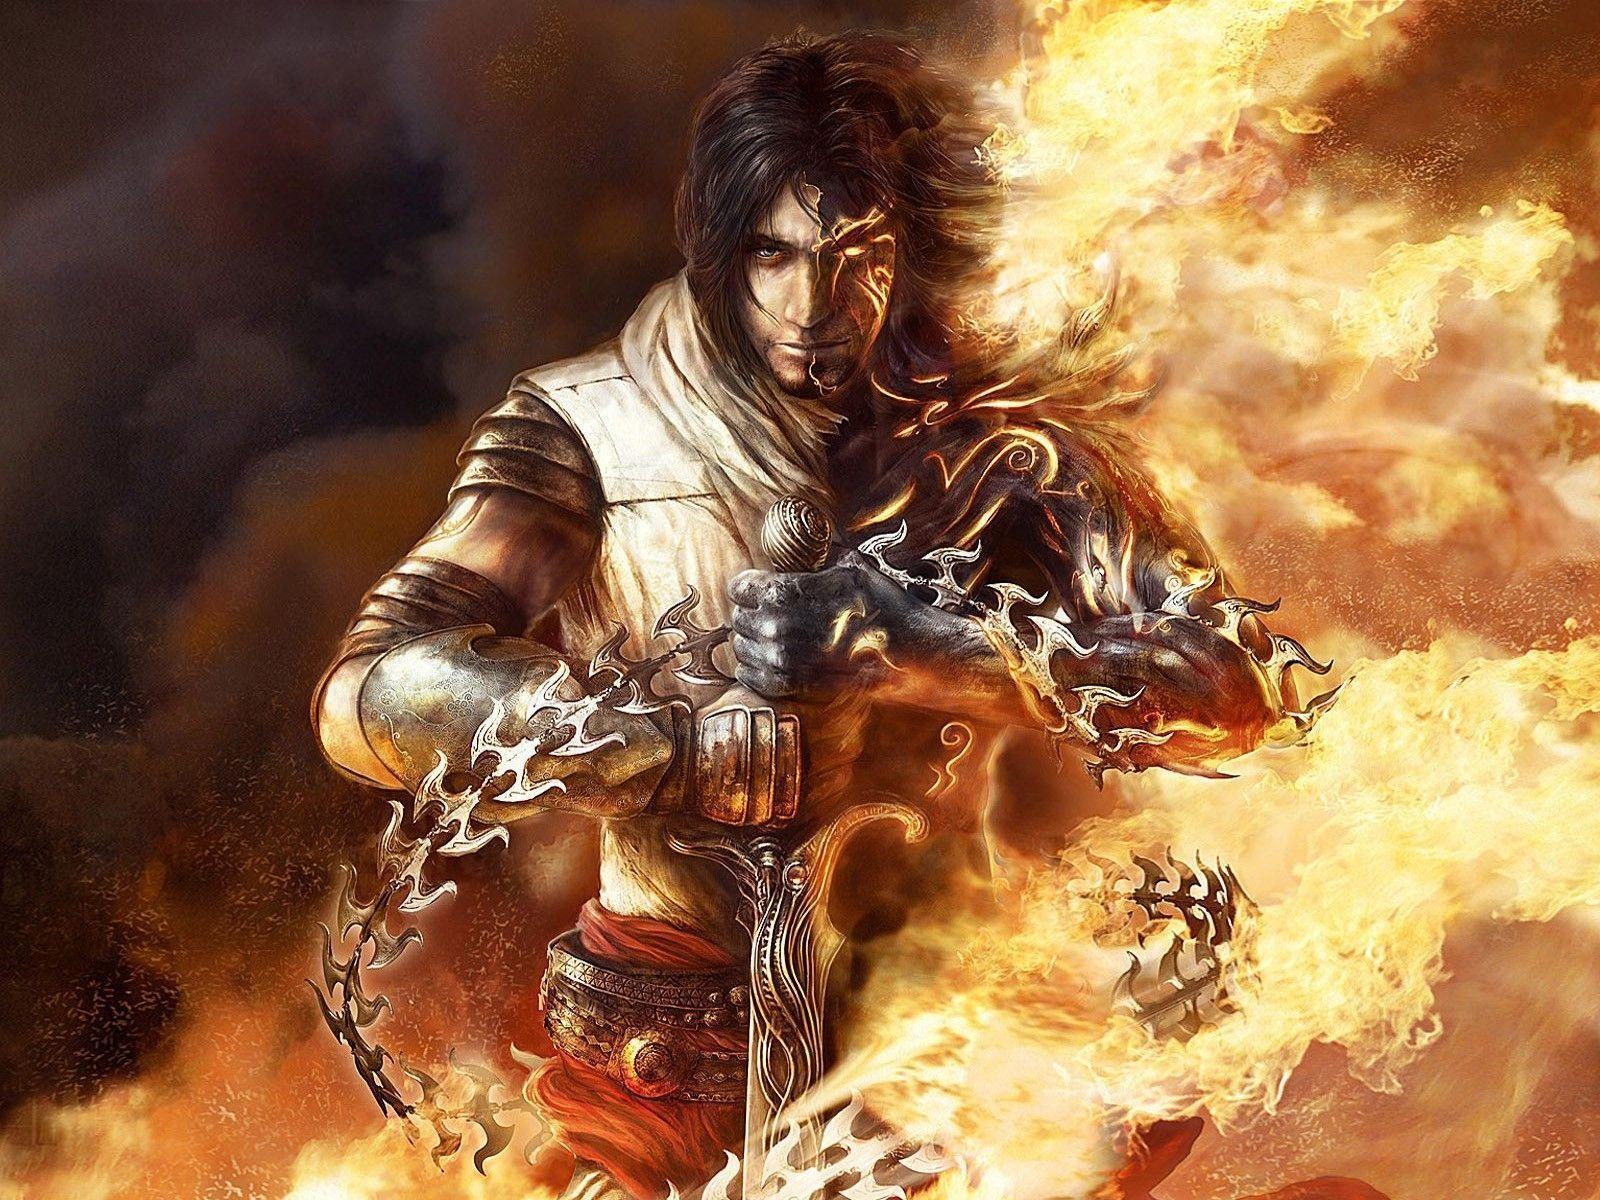 Prince of Persia: The Two Thrones (Video Game) Wallpaper (1600 x